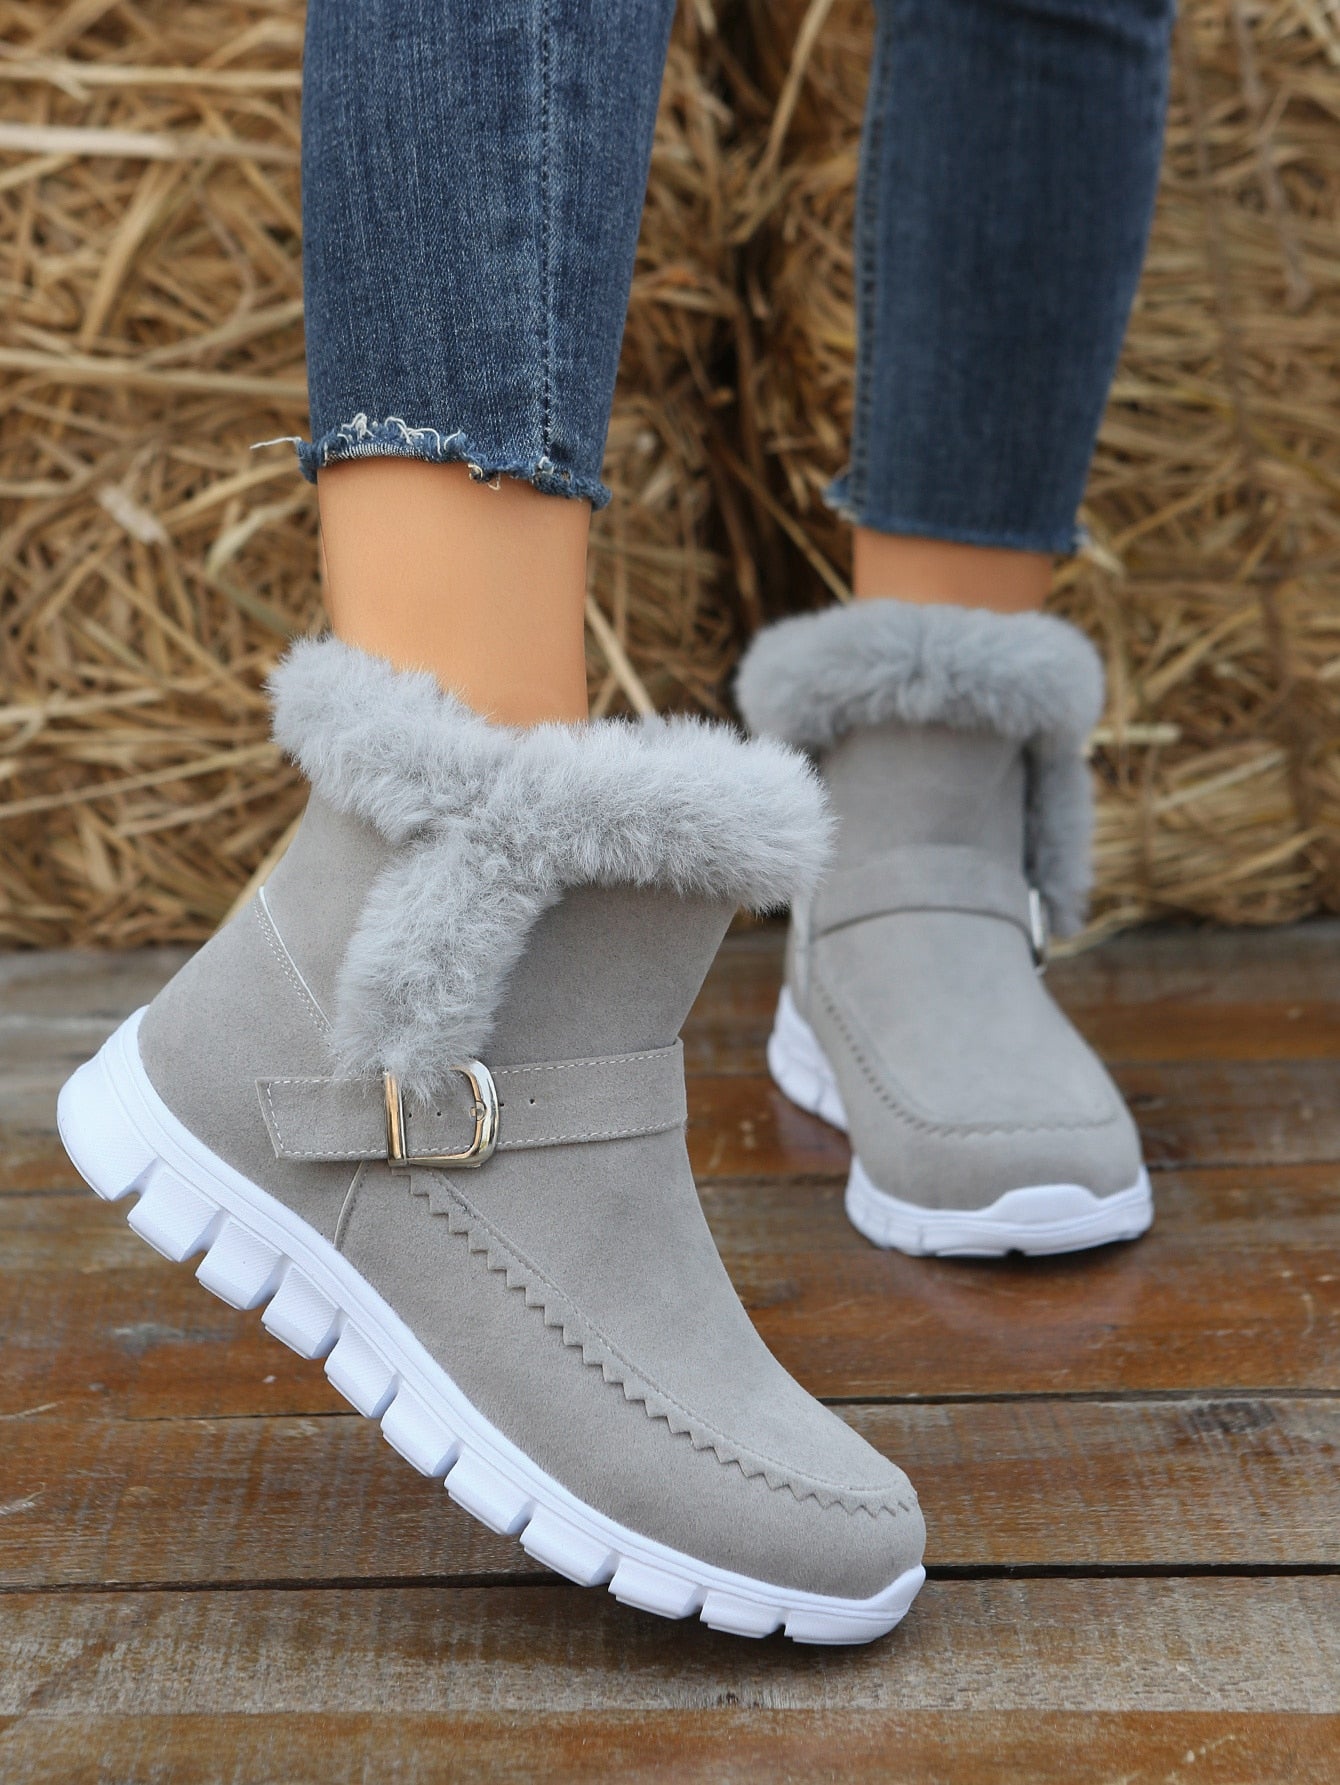 CHICDEAR Winter Women Fur Warm Chelsea Snow Boots Casual Shoes 2023 New Short Plush Suede Ankle Boots Flats Gladiator Sport Ladies Botas